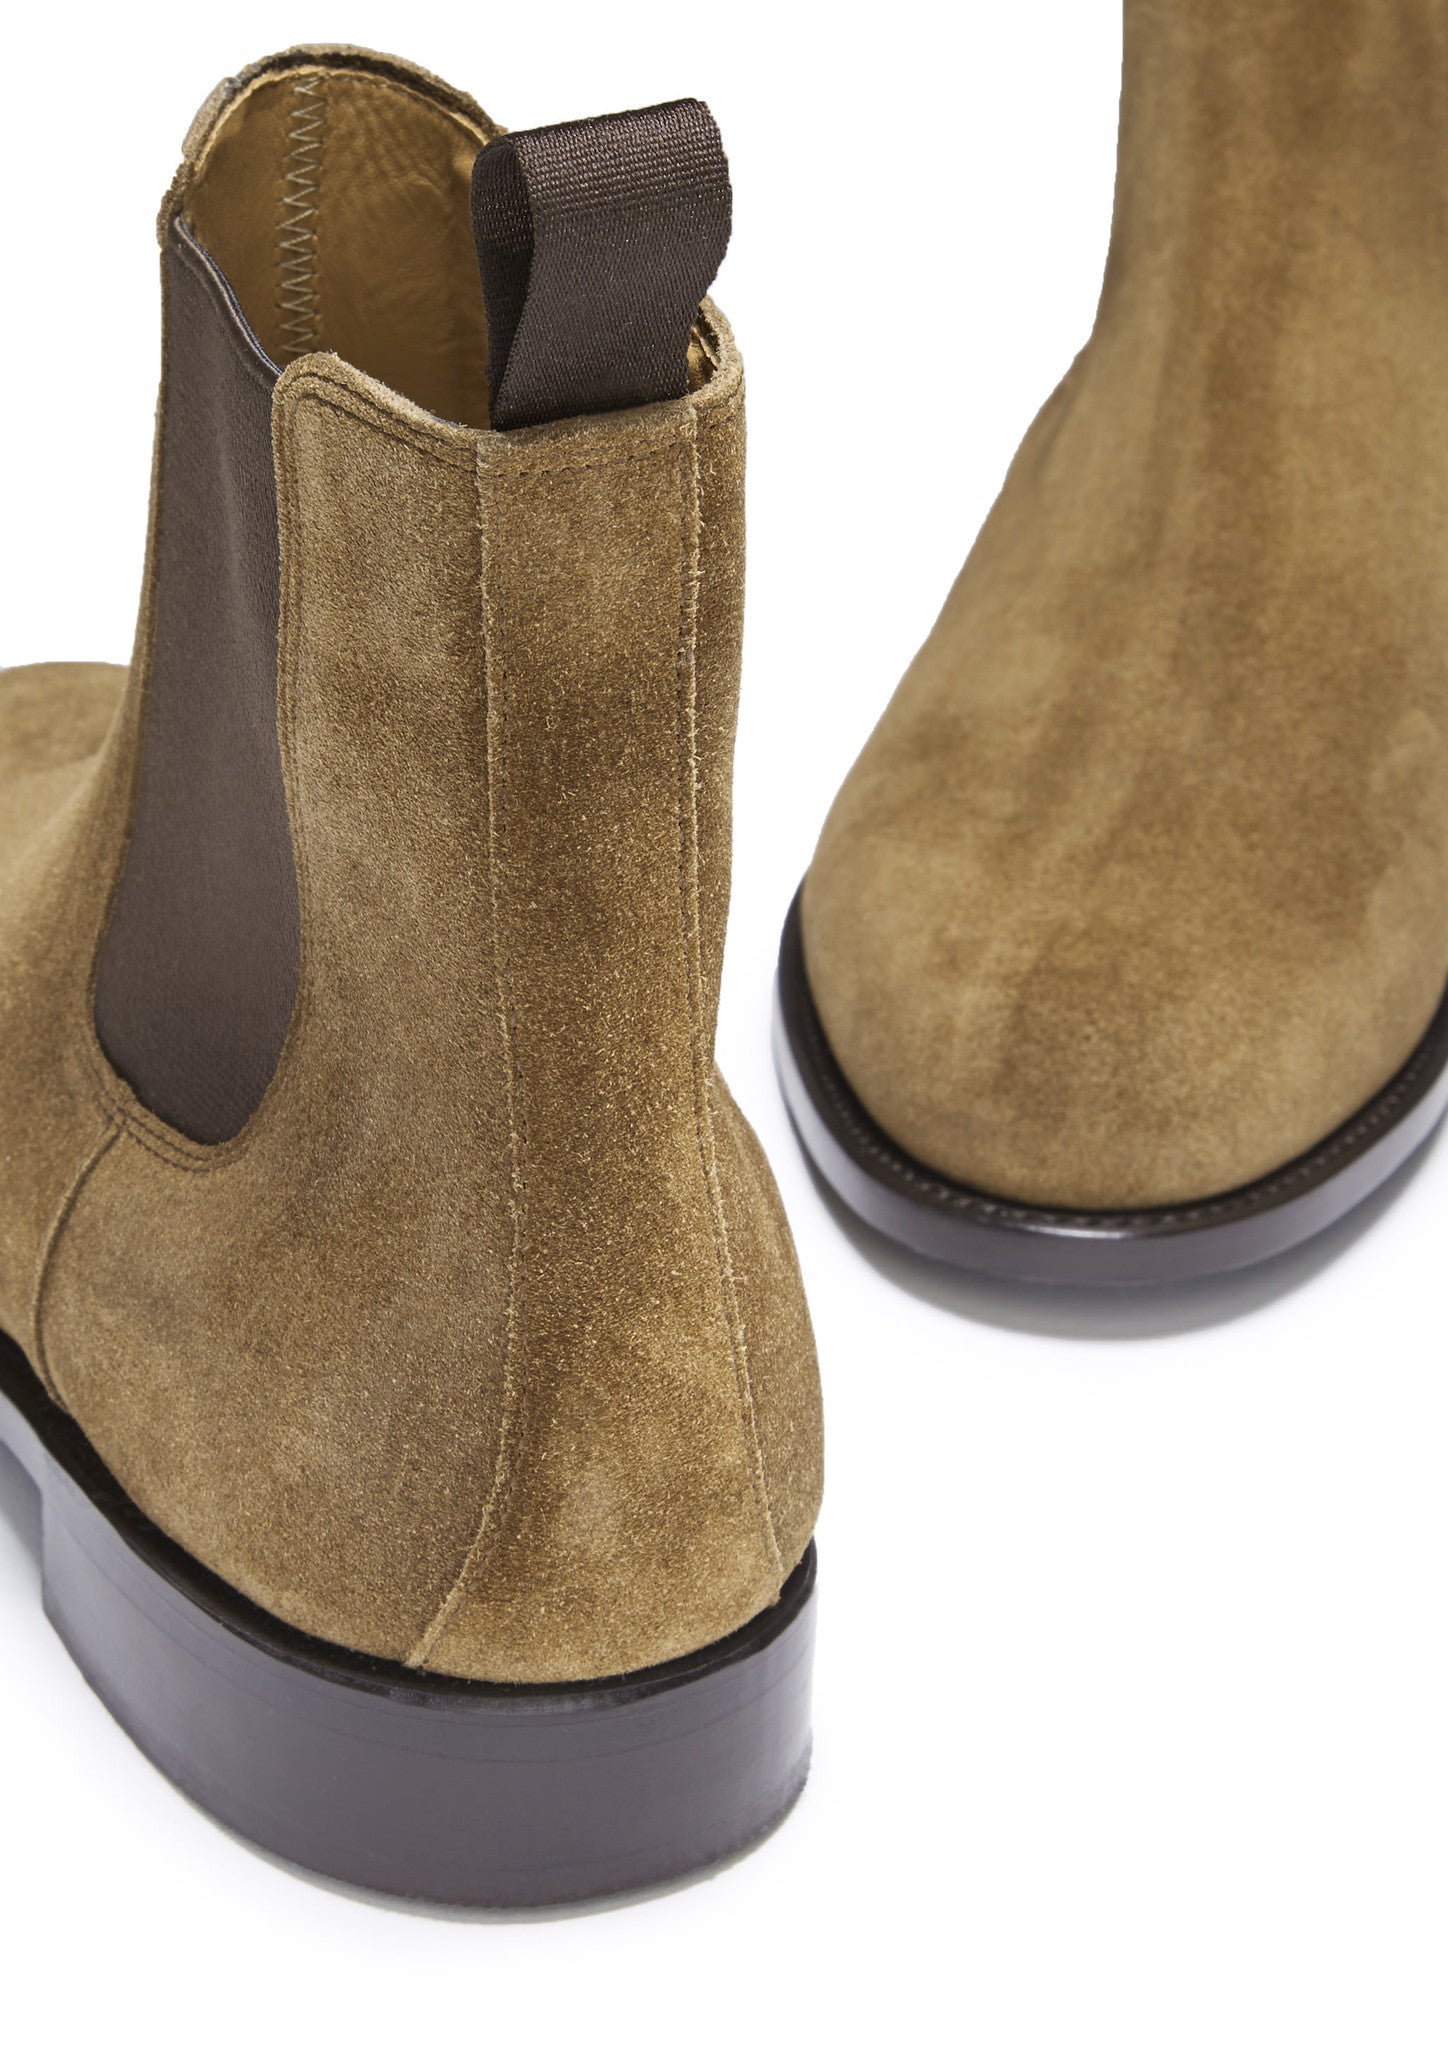 Chelsea Boots Tobacco Suede